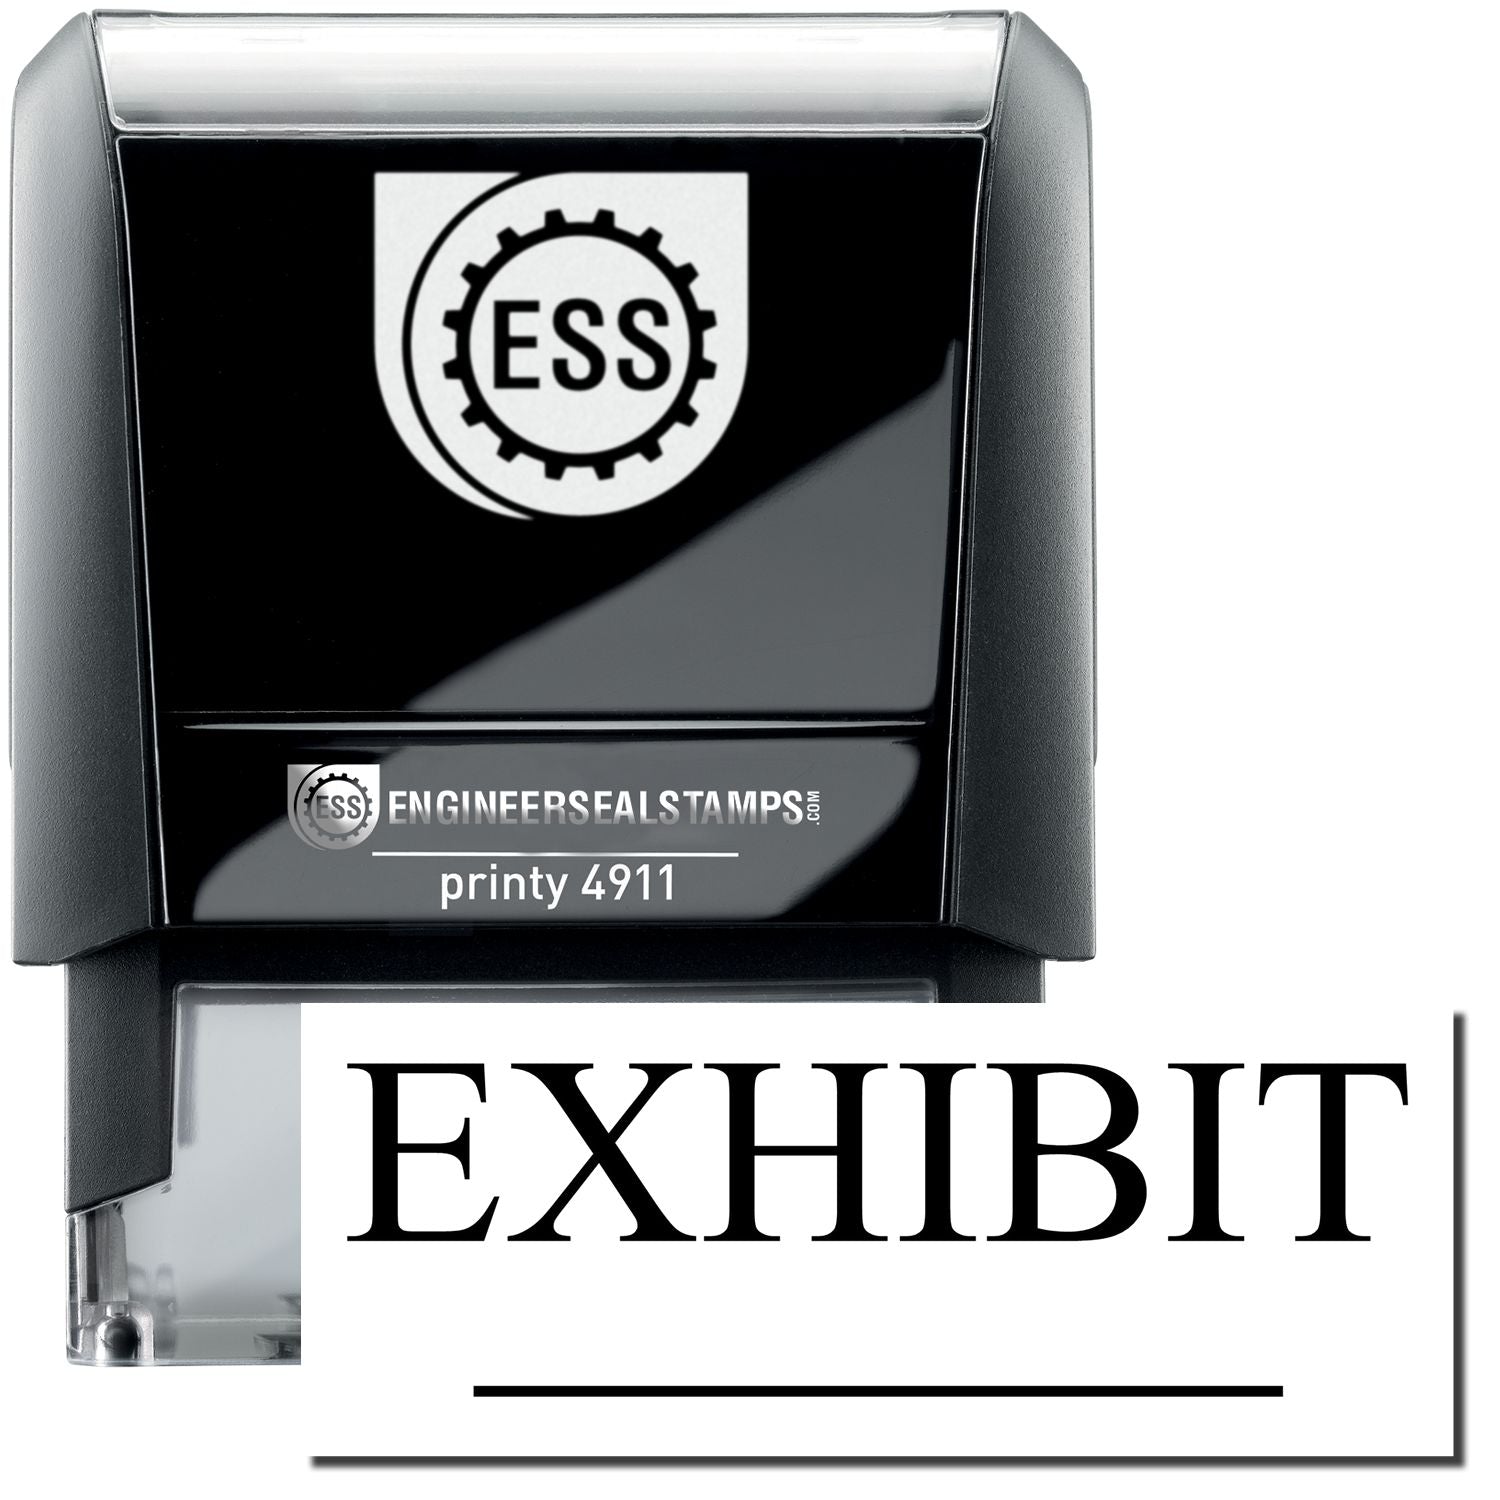 A self-inking stamp with a stamped image showing how the text "EXHIBIT" with a line under it is displayed after stamping.